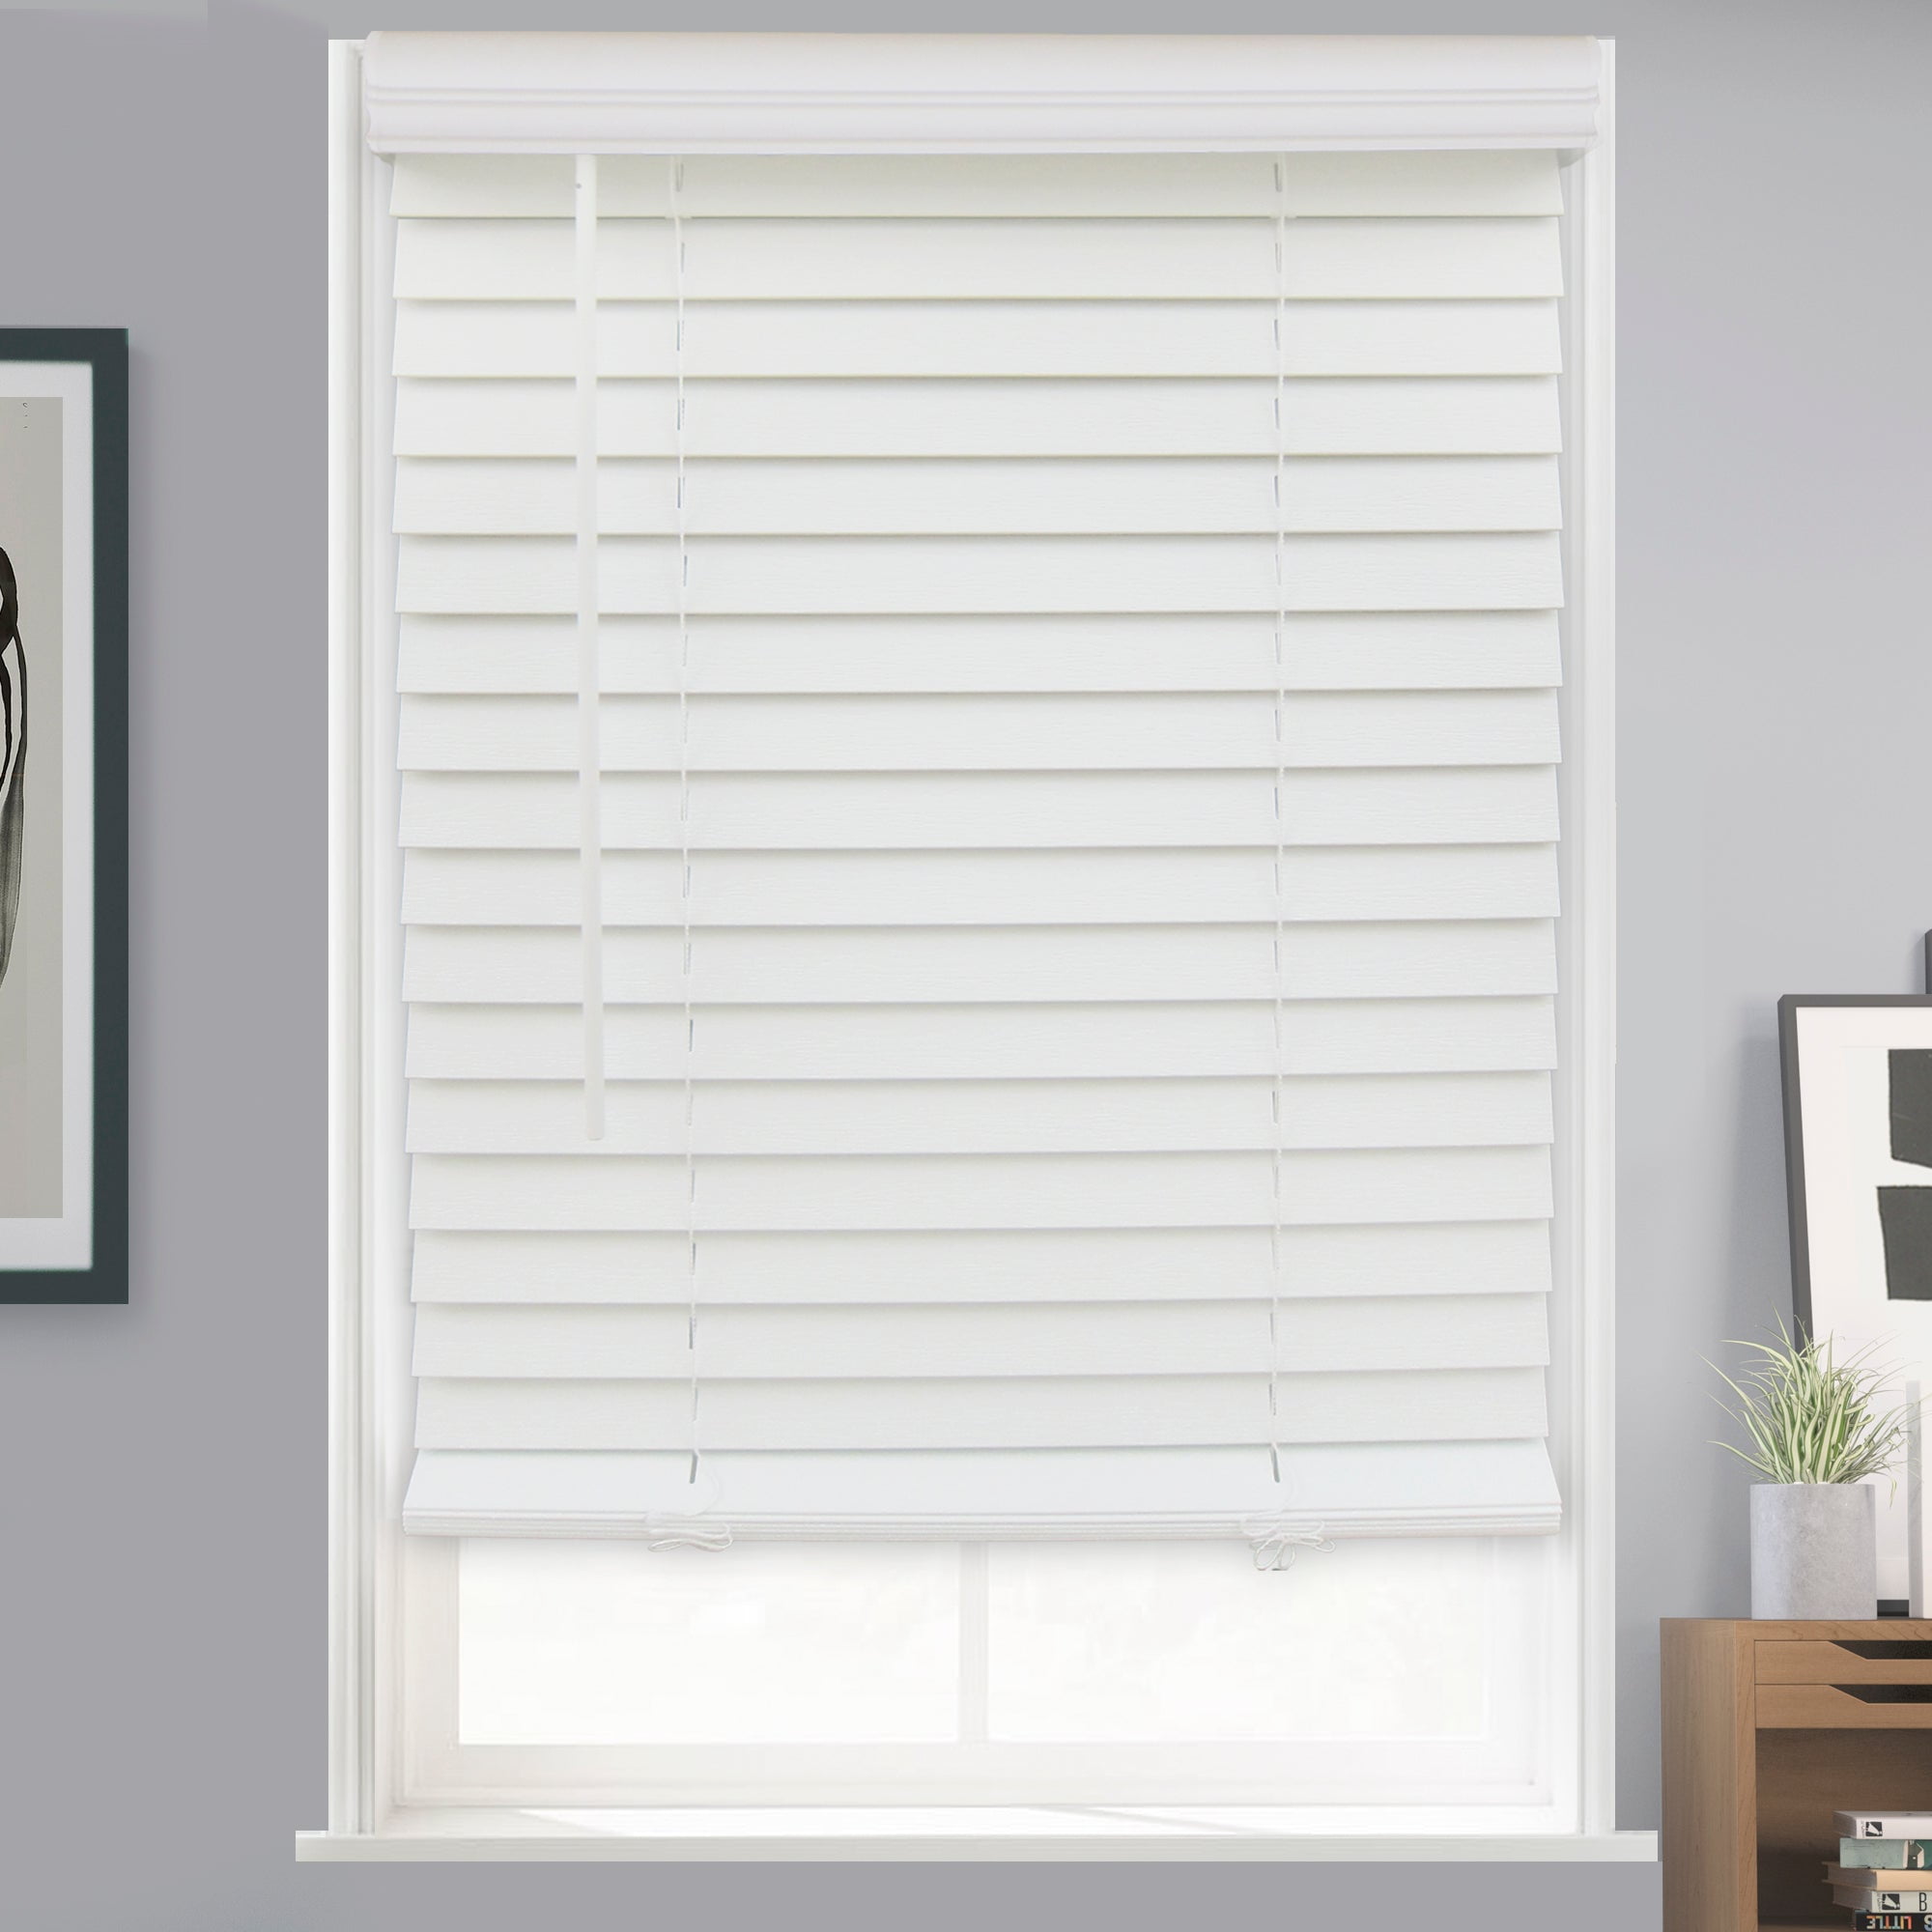 US Window And Floor 2" Faux Wood 71.5" W x 60" H Inside Mount Cordless Blinds x 